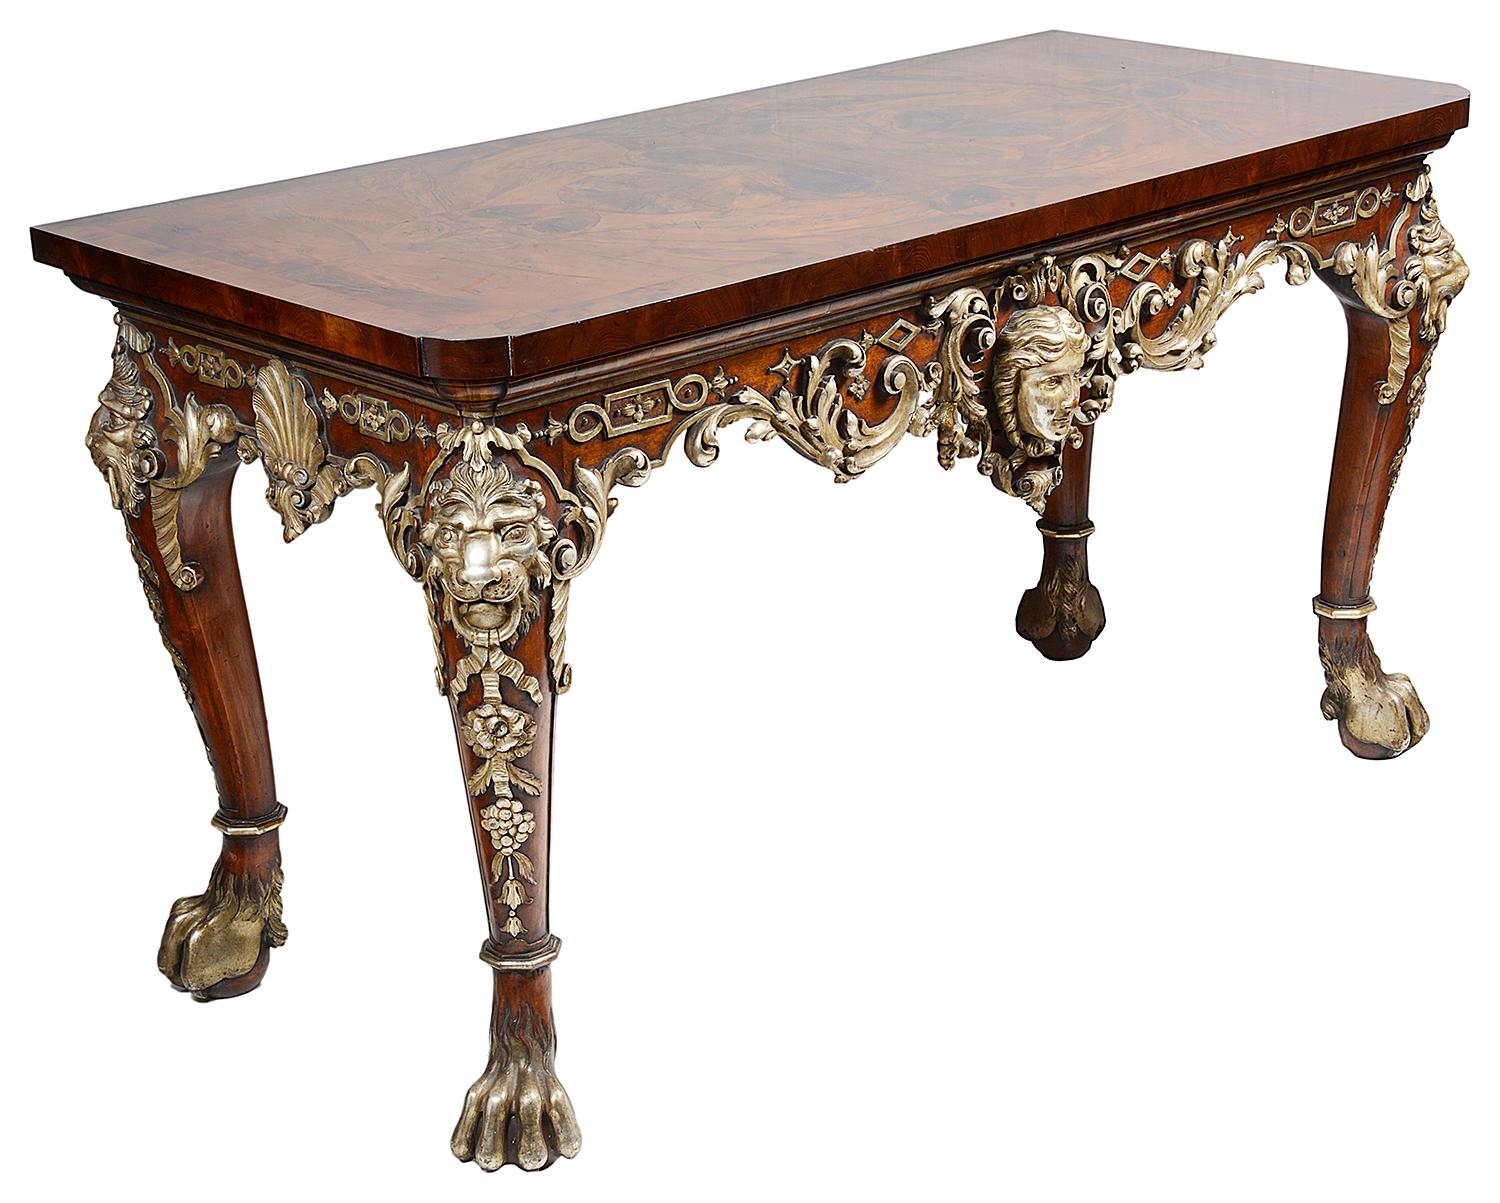 A very impressive pair of walnut and silver gilt William Kent style console tables, each having oyster walnut veneered tops, carved wood apron of scrolling foliate and motif decoration. Classical mask and lions head mounts, raised on powerful